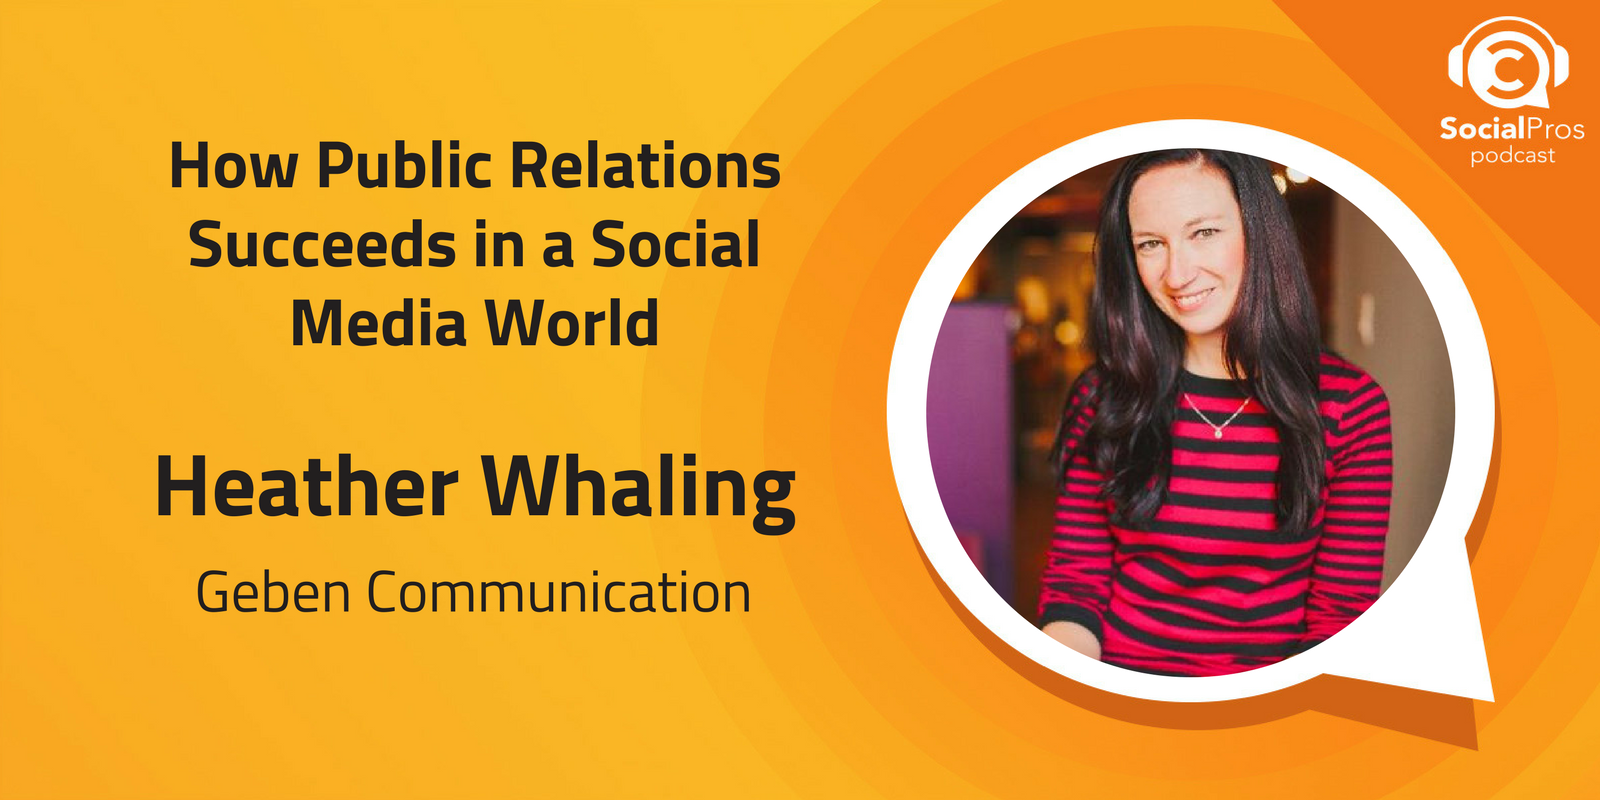 How Public Relations Succeeds in a Social Media World